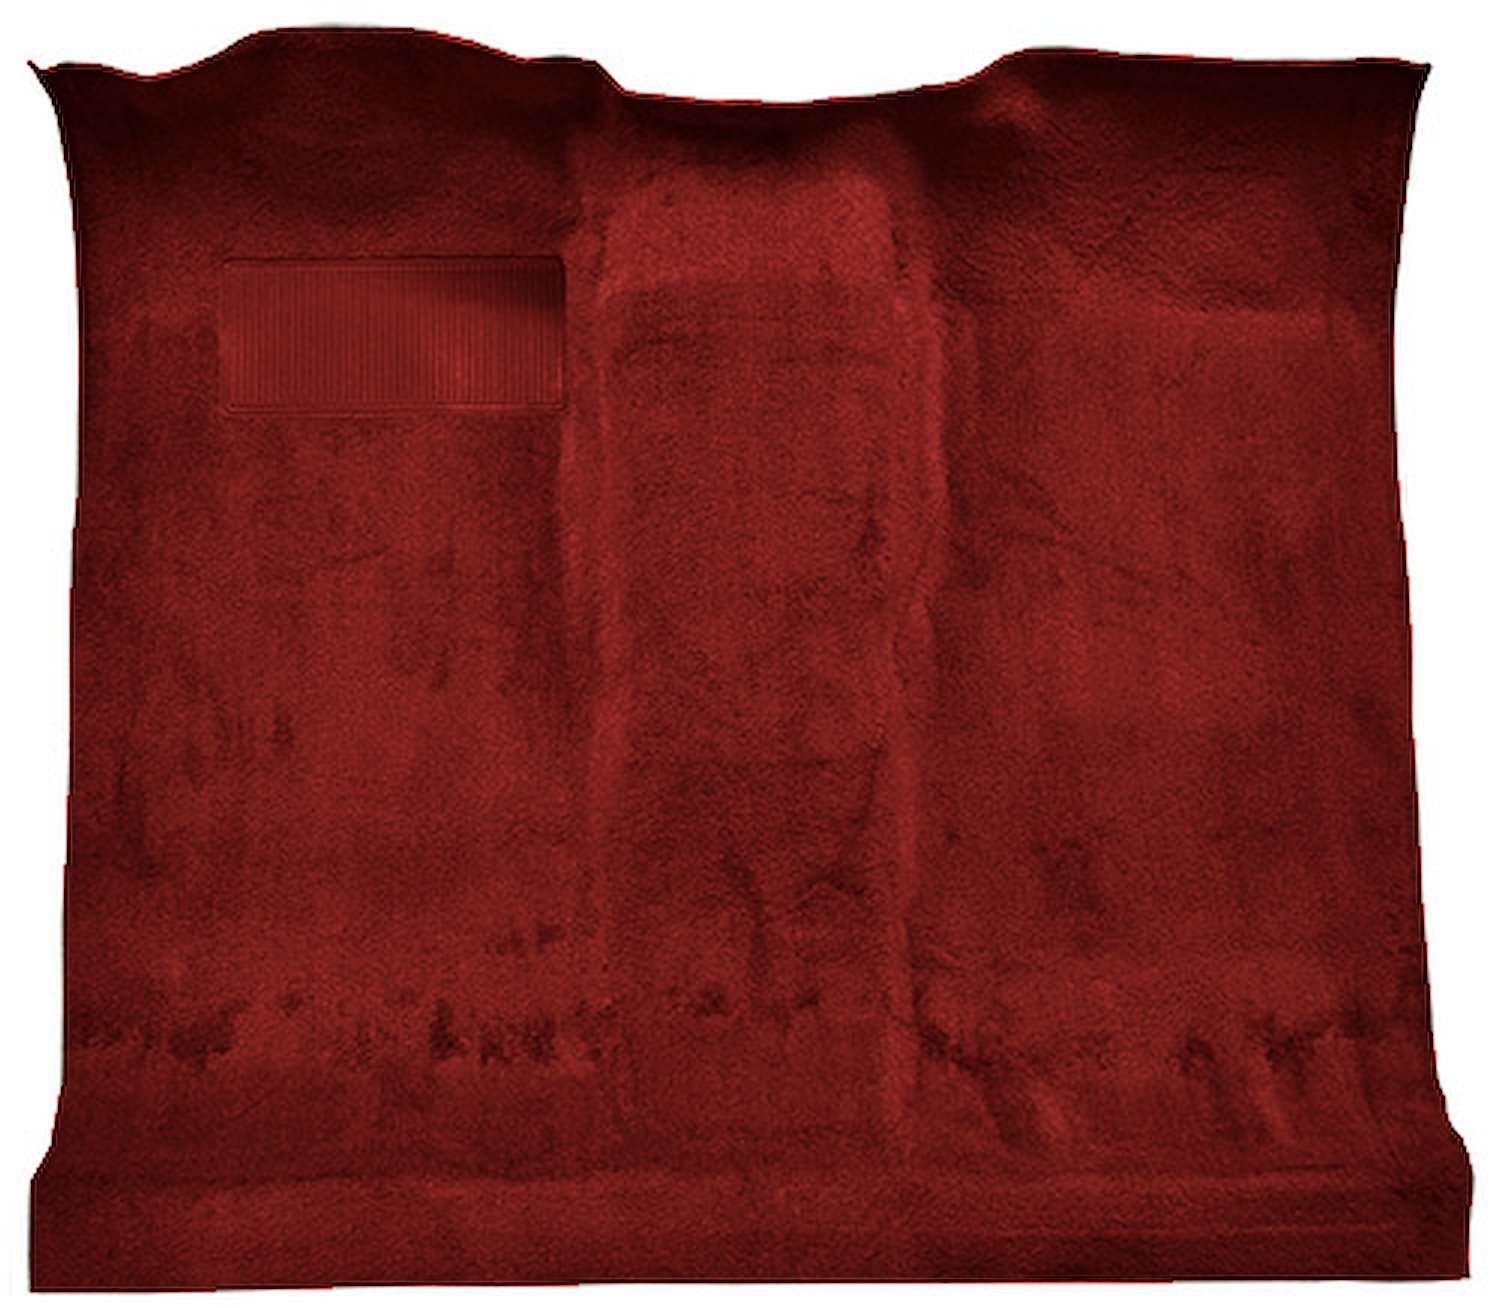 Molded Cut Pile Passenger Area Carpet for 1974-1977 Chevy Blazer, GMC Jimmy [OE-Style Jute Backing, 1-Piece, Oxblood]